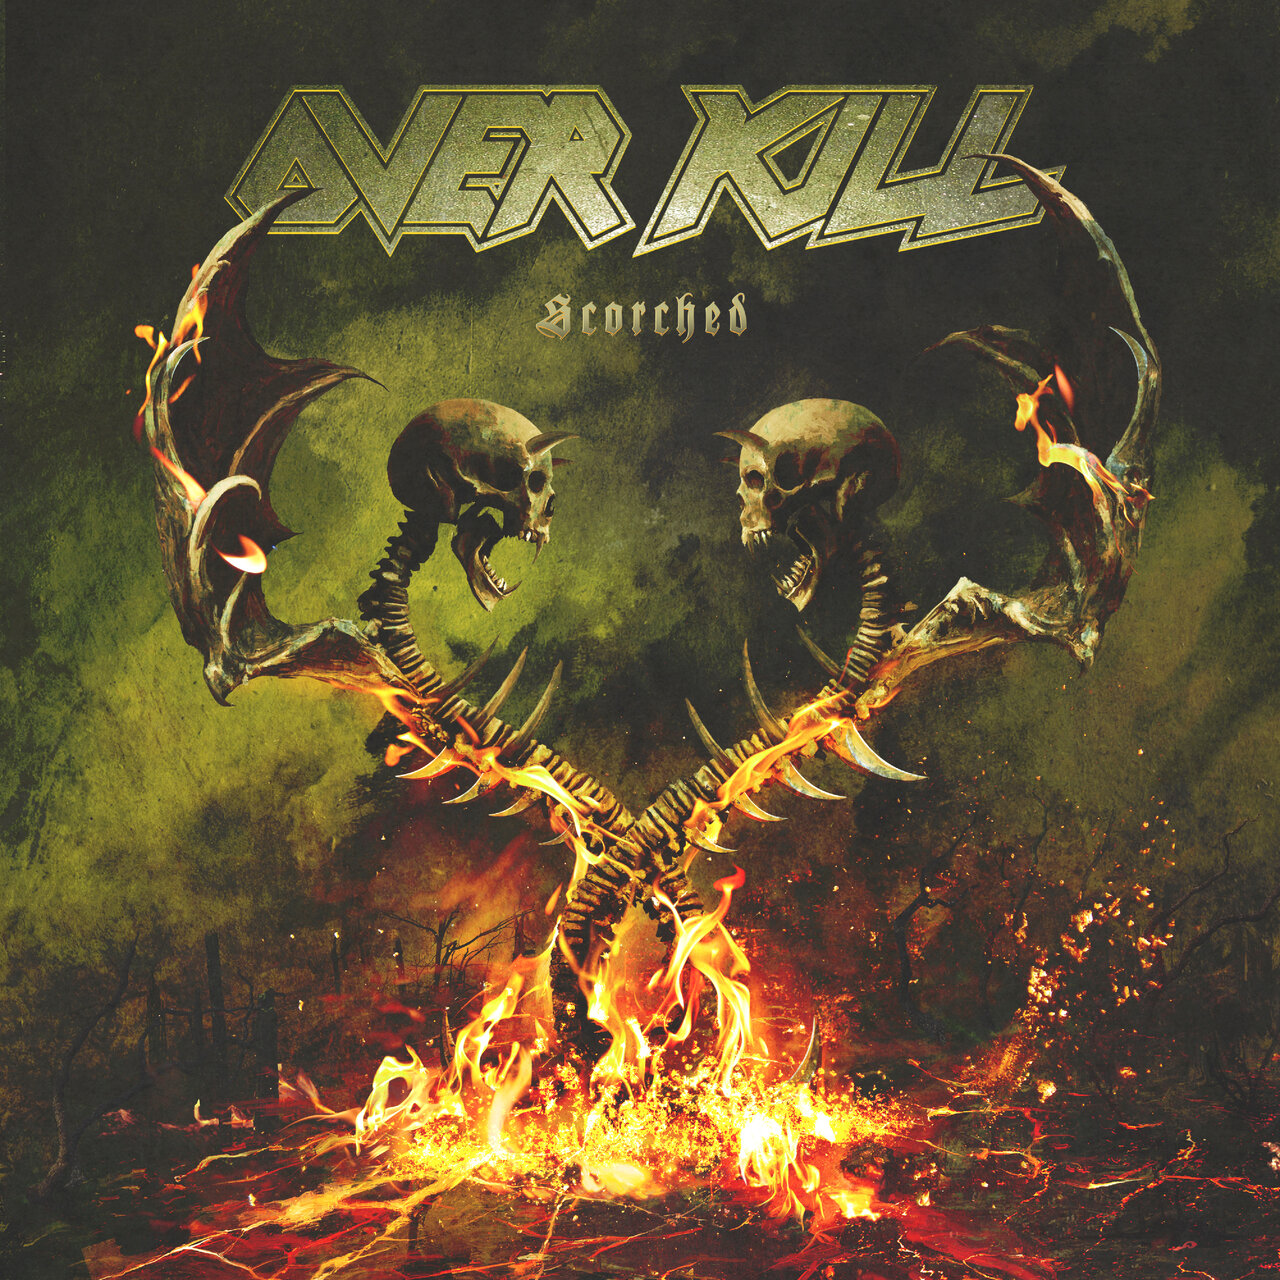 Overkill - "Scorched" - 2023